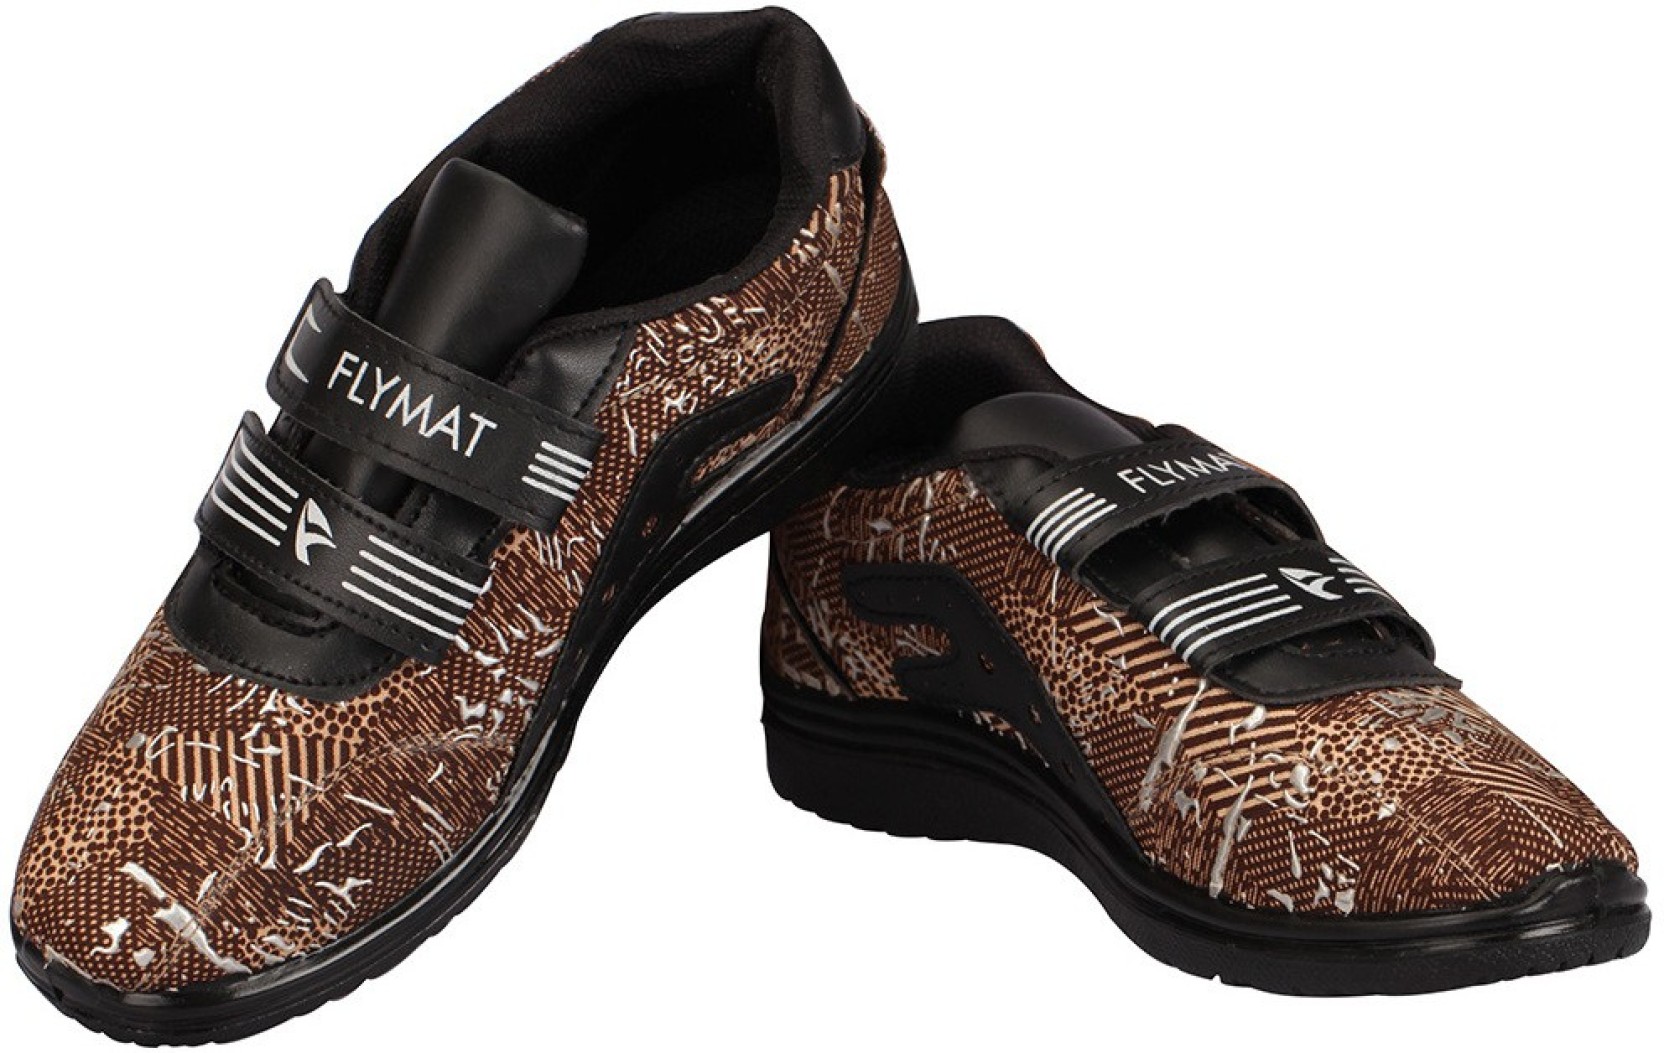 Flymat Flymat Women Casual Shoes - Buy Brown Color Flymat Flymat Women Casual Shoes Online at ...